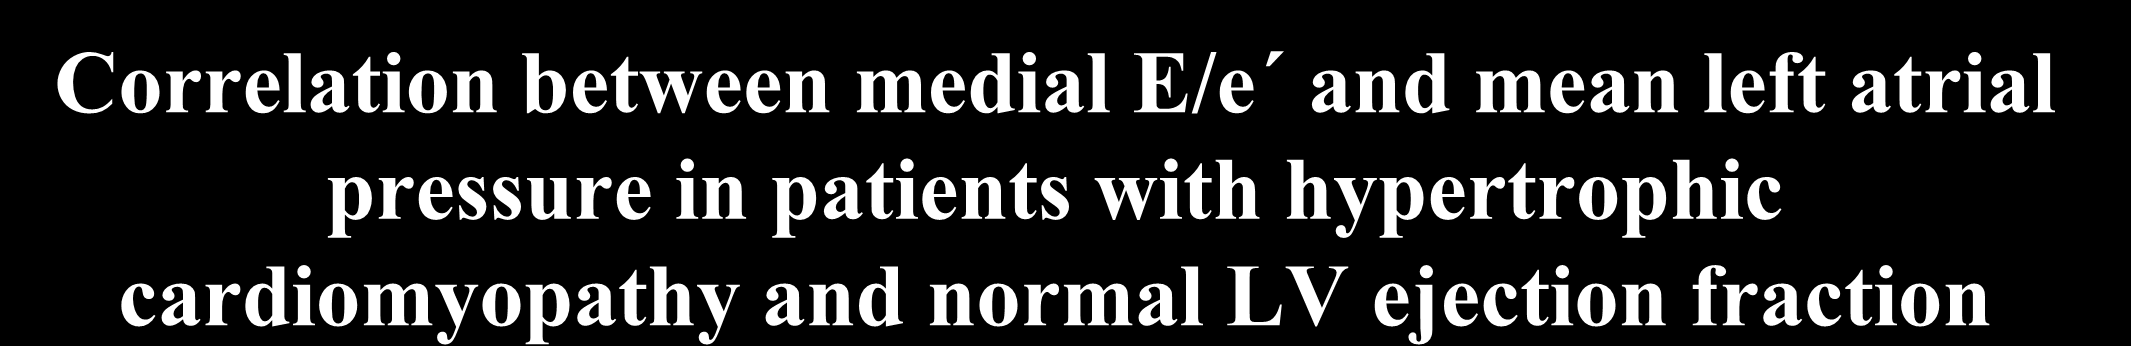 Correlation between medial E/e and mean left atrial pressure in patients with